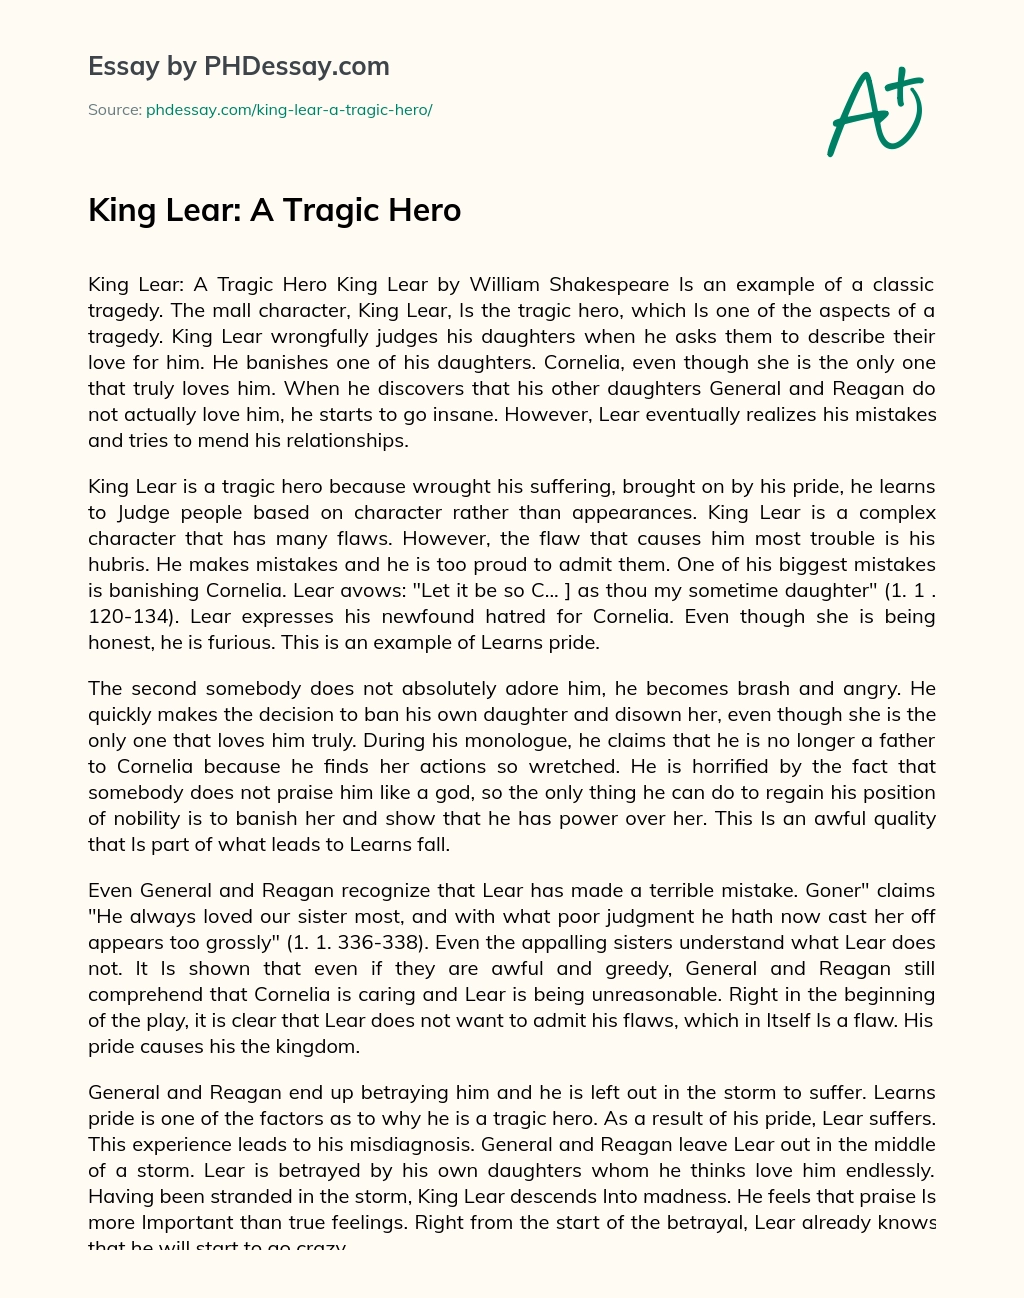 Реферат: Analysis Of King Lear Essay Research Paper